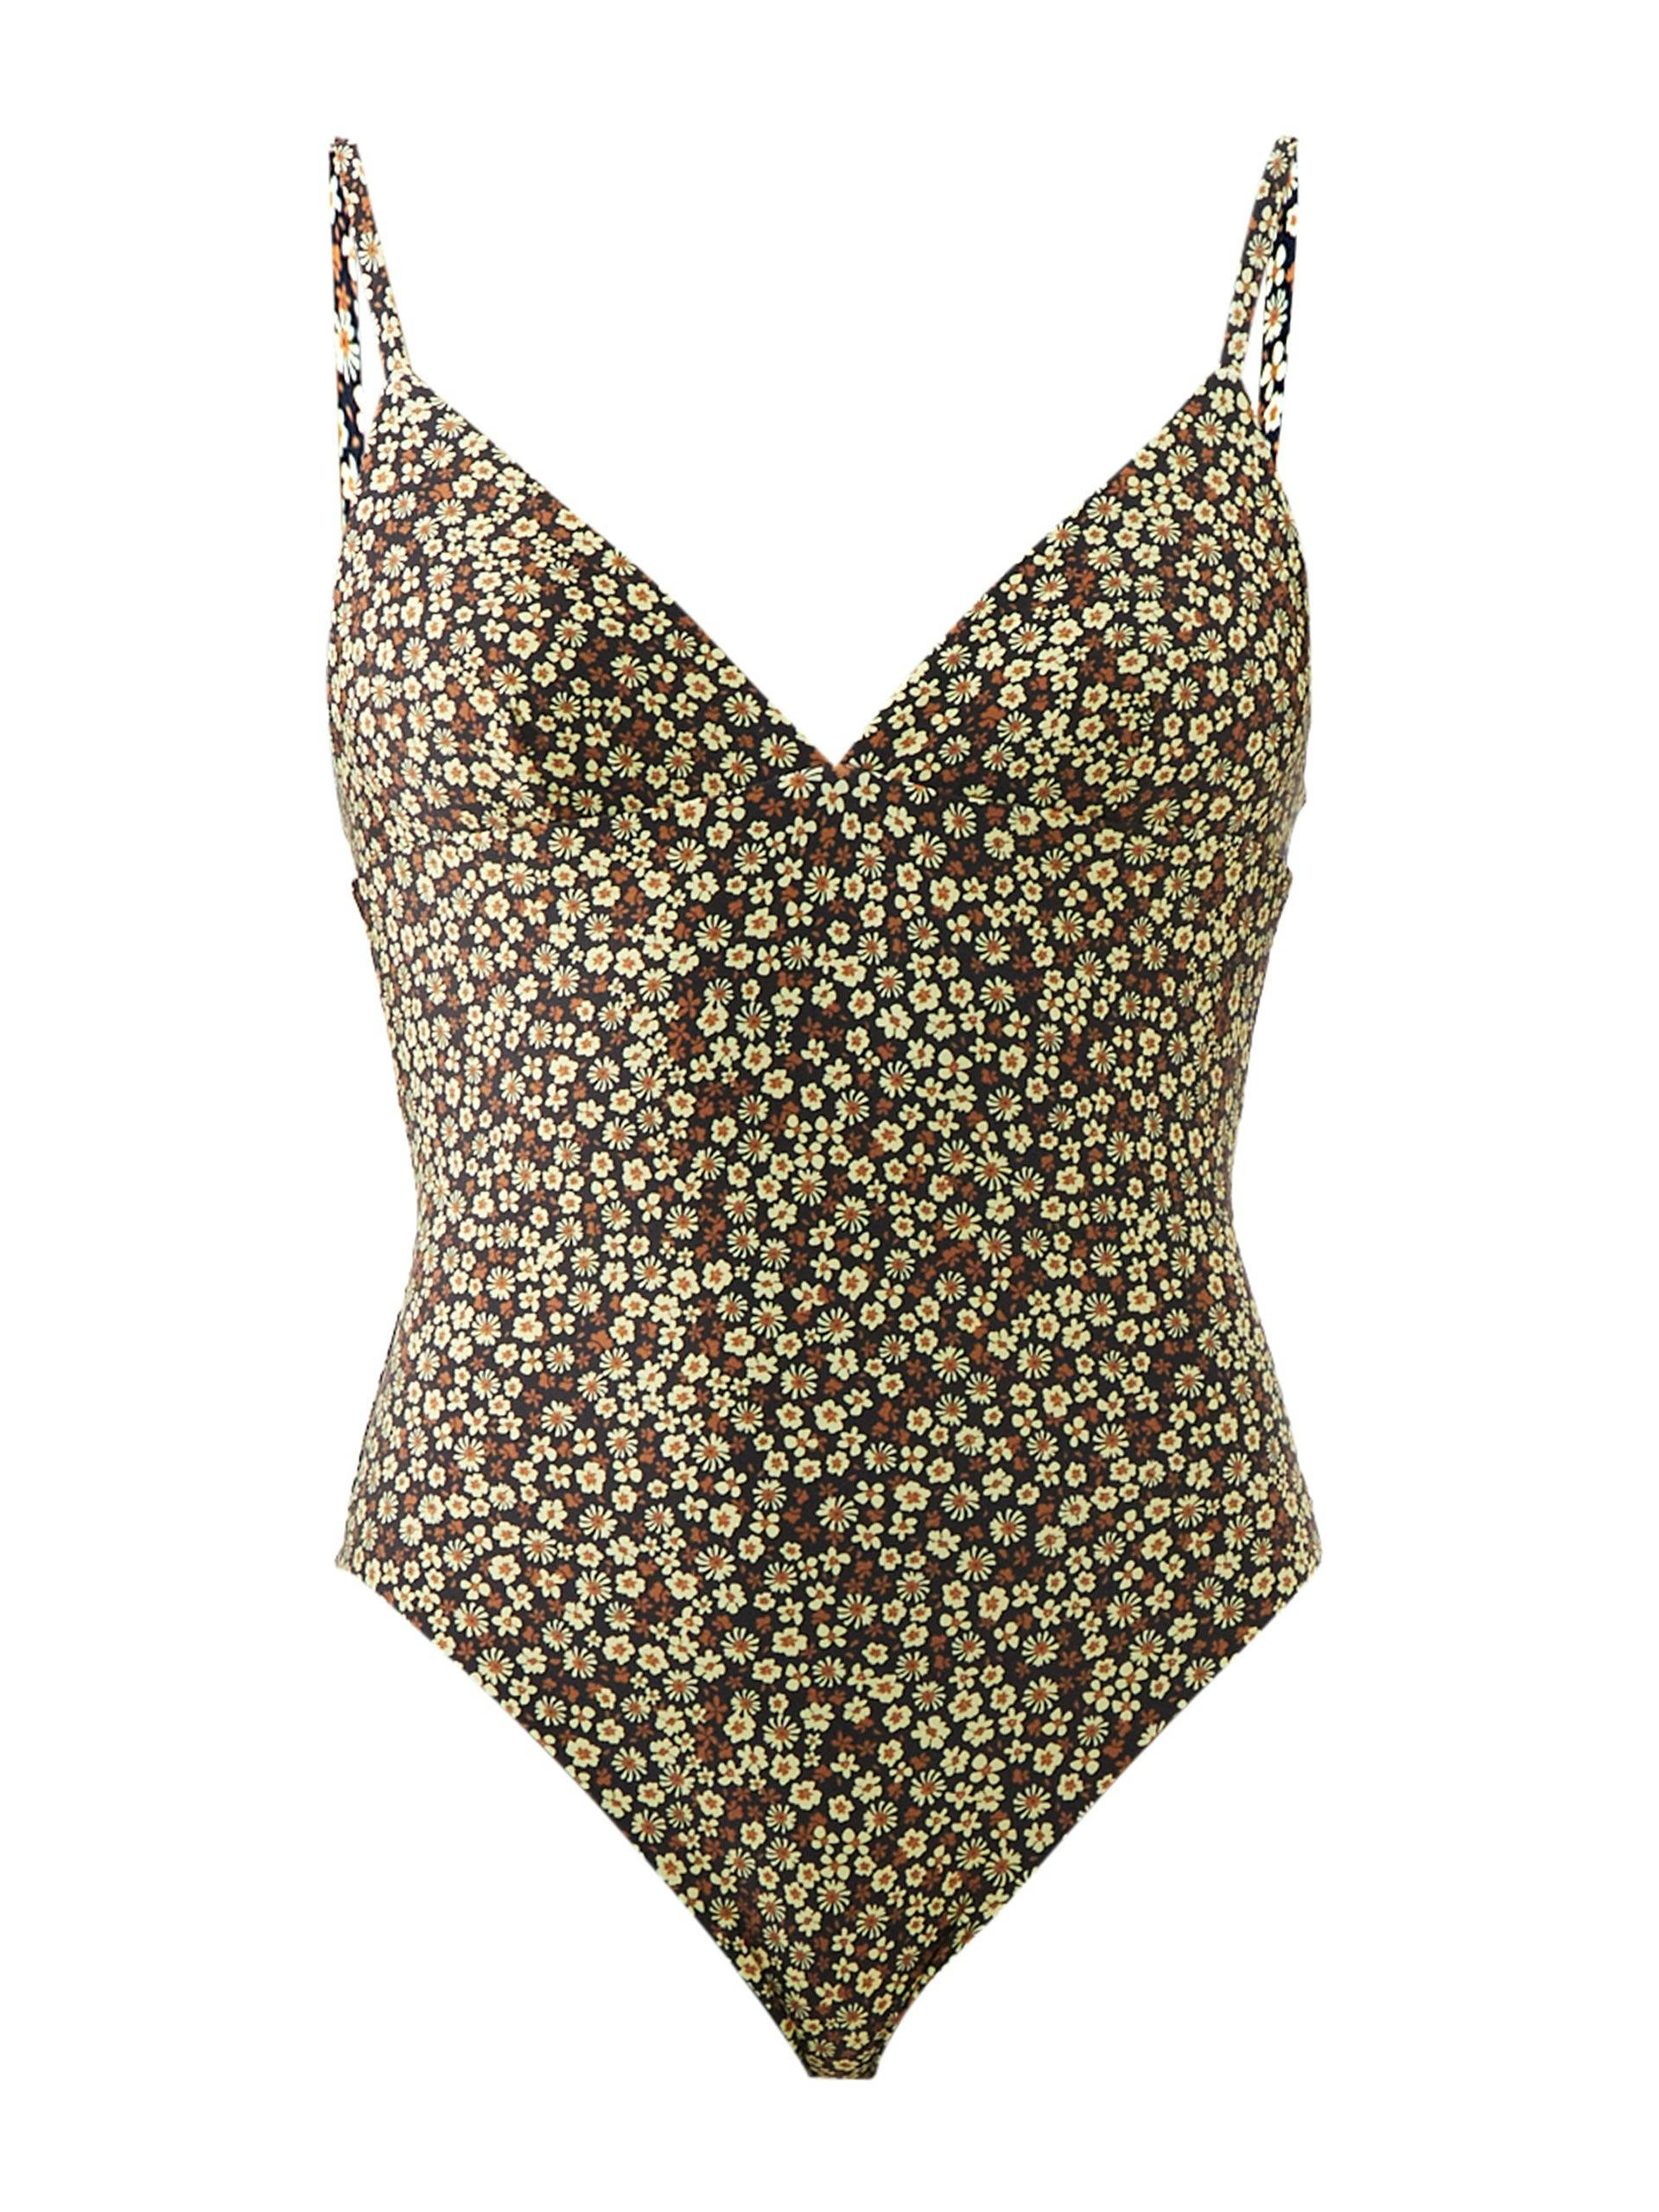 Brown floral swimsuit